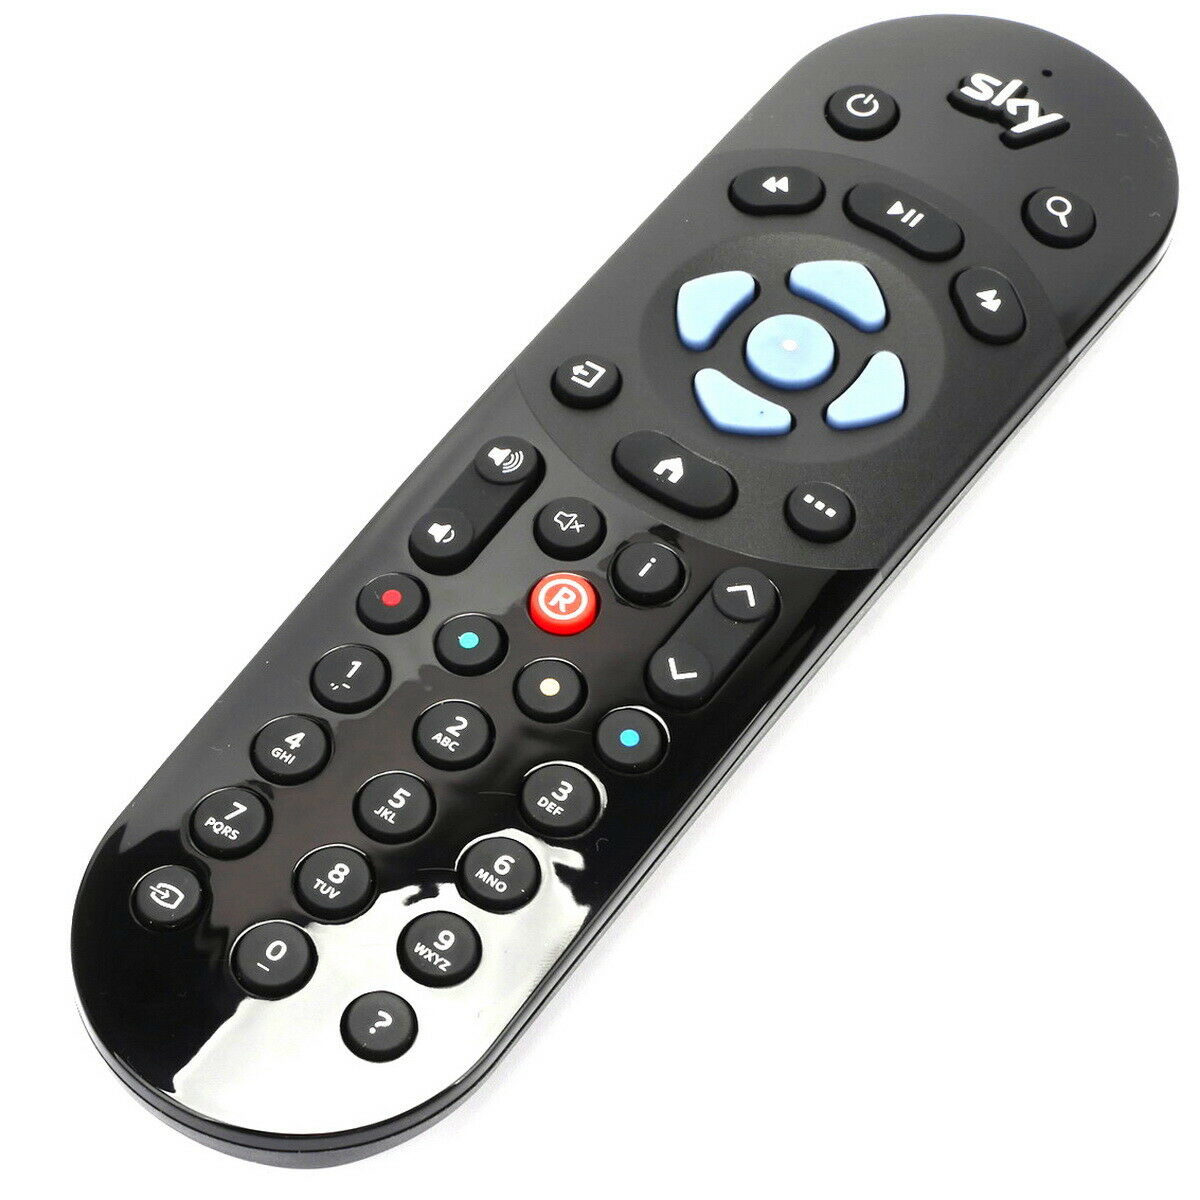 E57065-Universal-Replacement-Infrared-Remote-Control-For-Sky-Q-Version-2-TV-Box-1671331